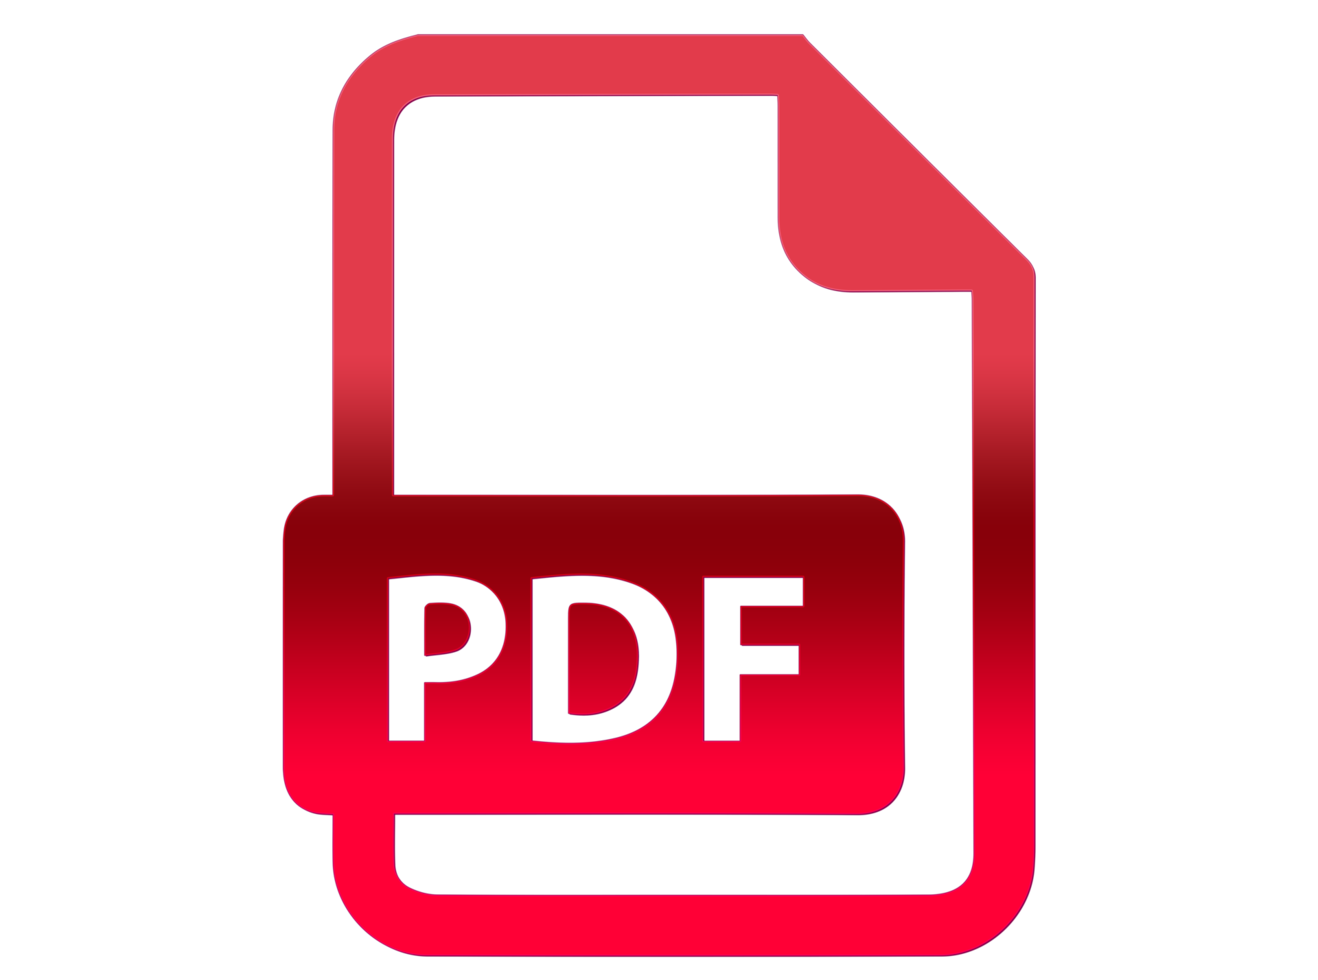 Pdf icon on transparent background. png